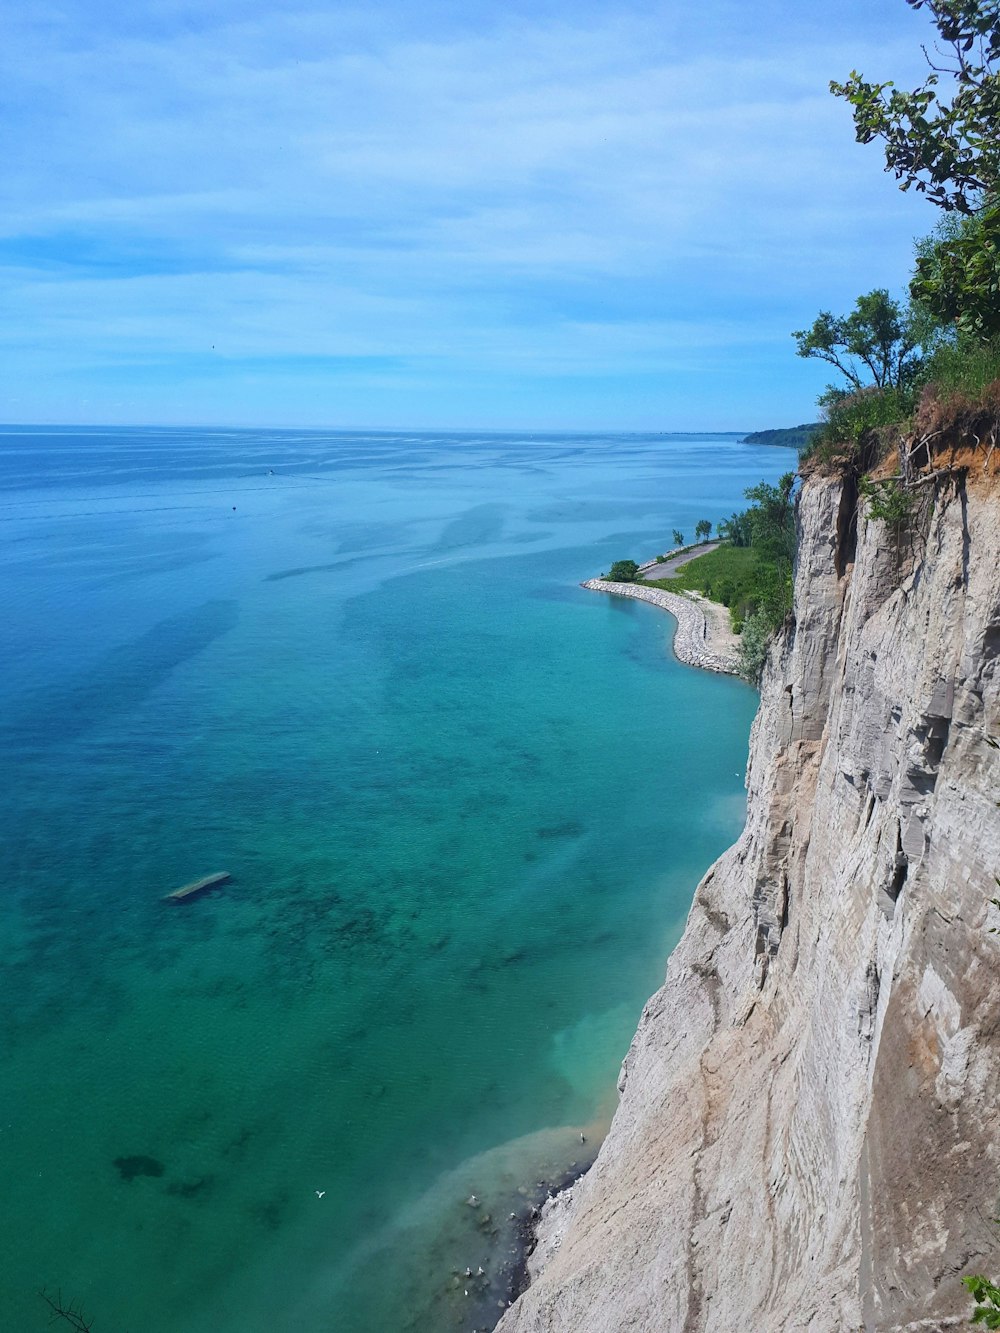 a large body of water sitting next to a cliff